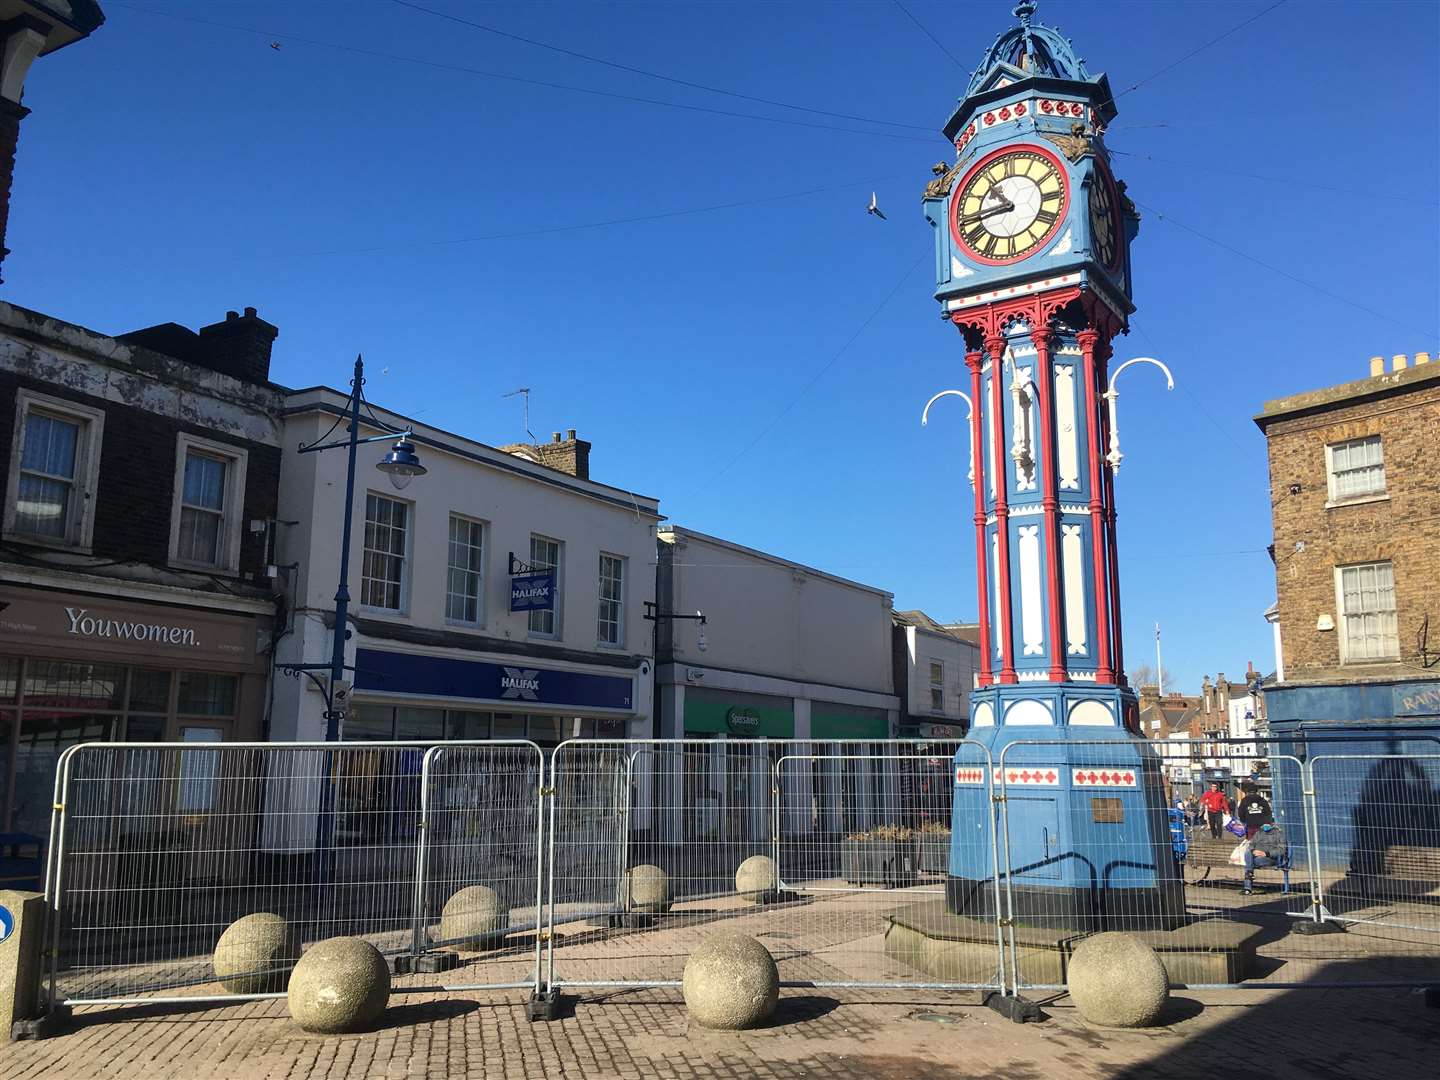 The clock tower, which was fenced off in February, has been blue, red and white in recent years